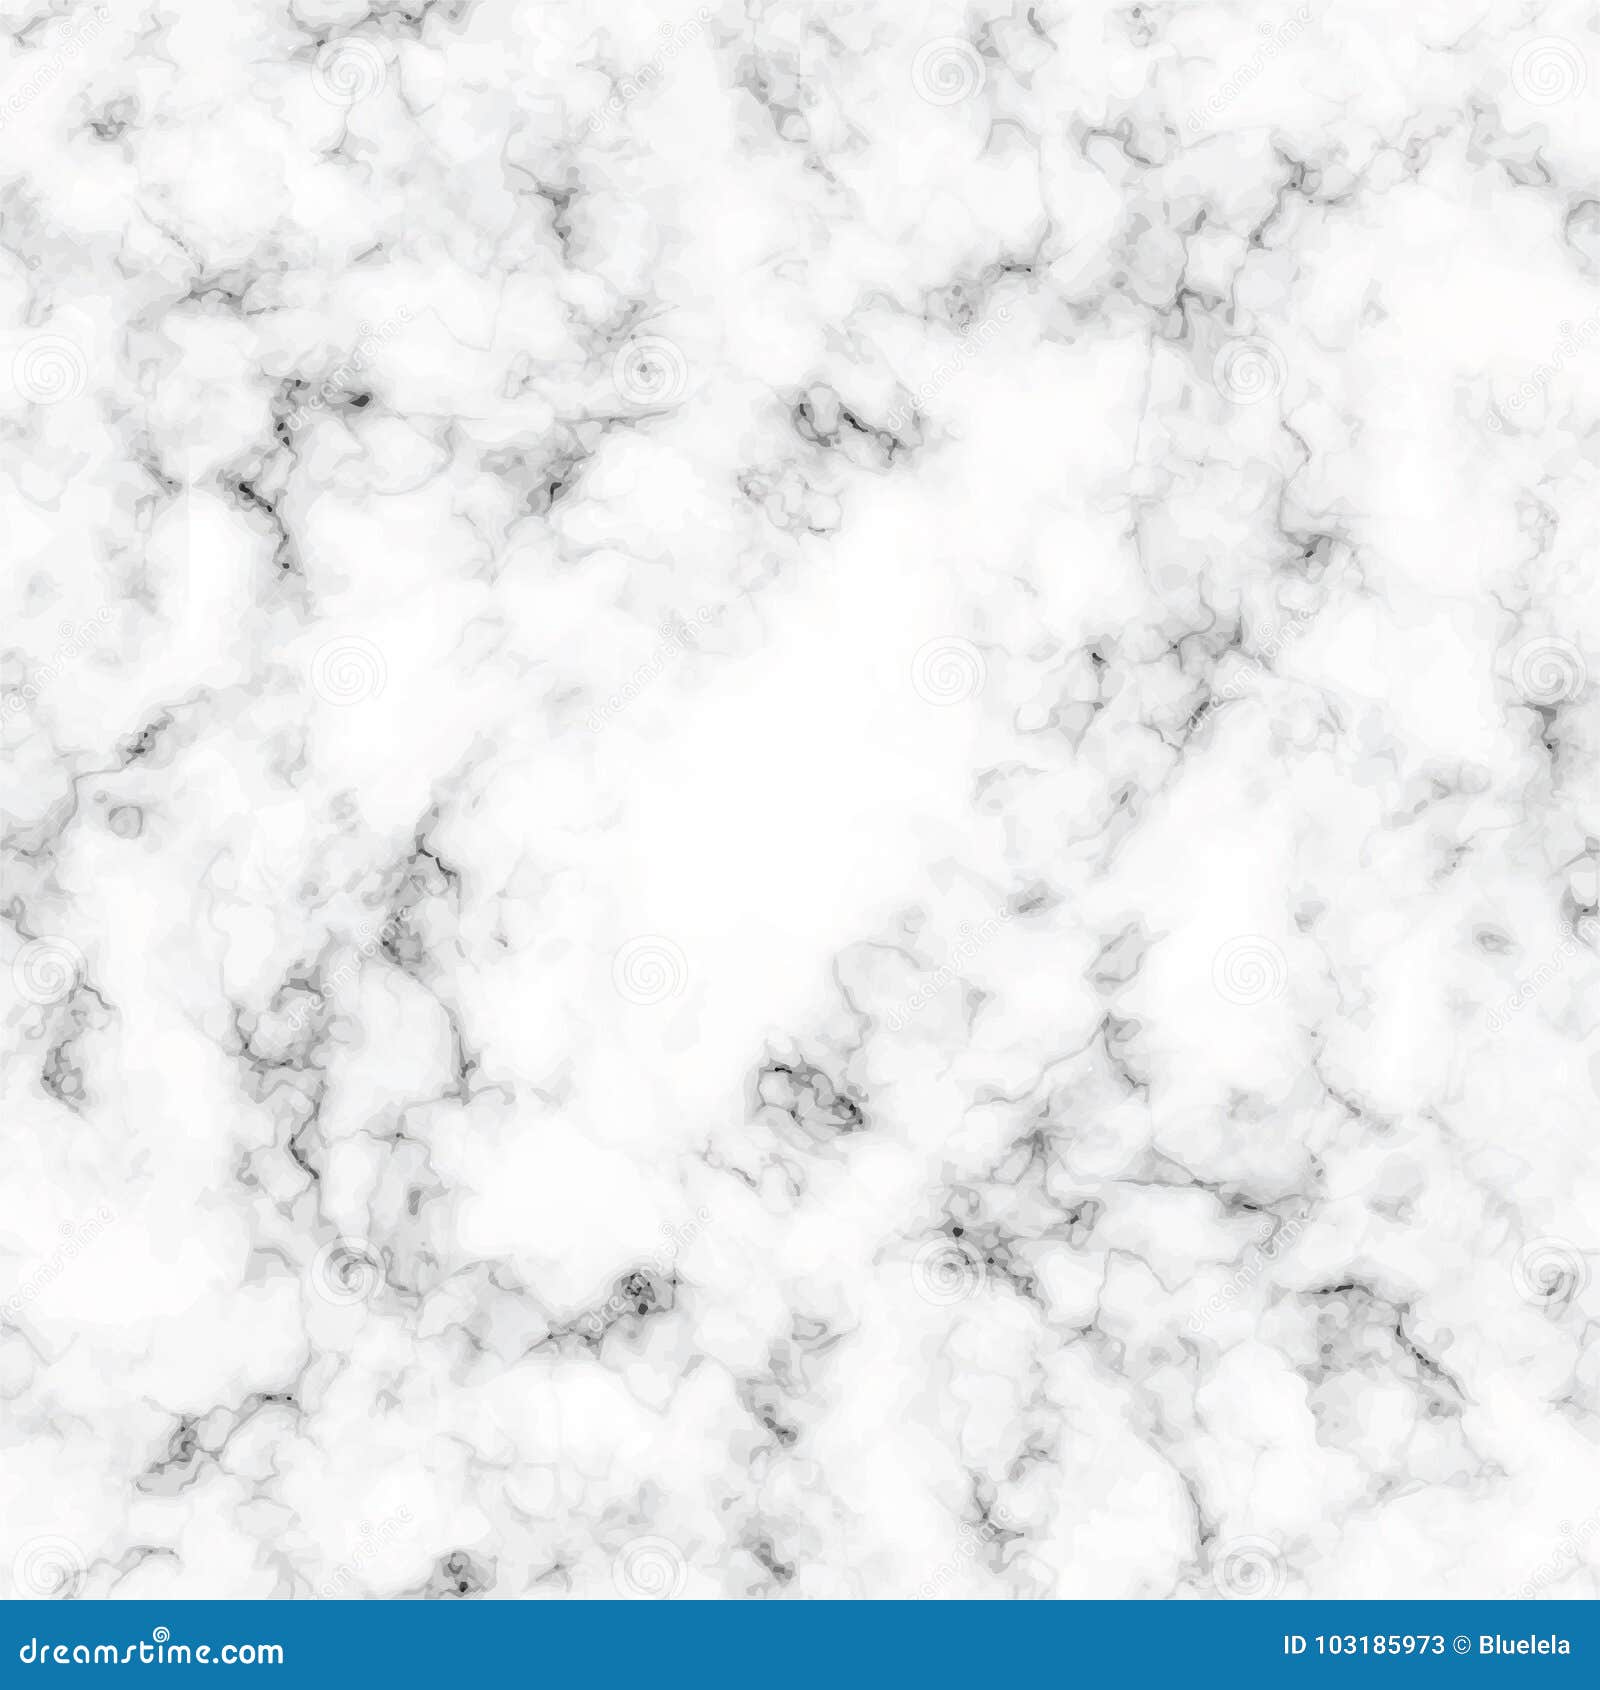  marble texture  seamless pattern, black and white marbling surface